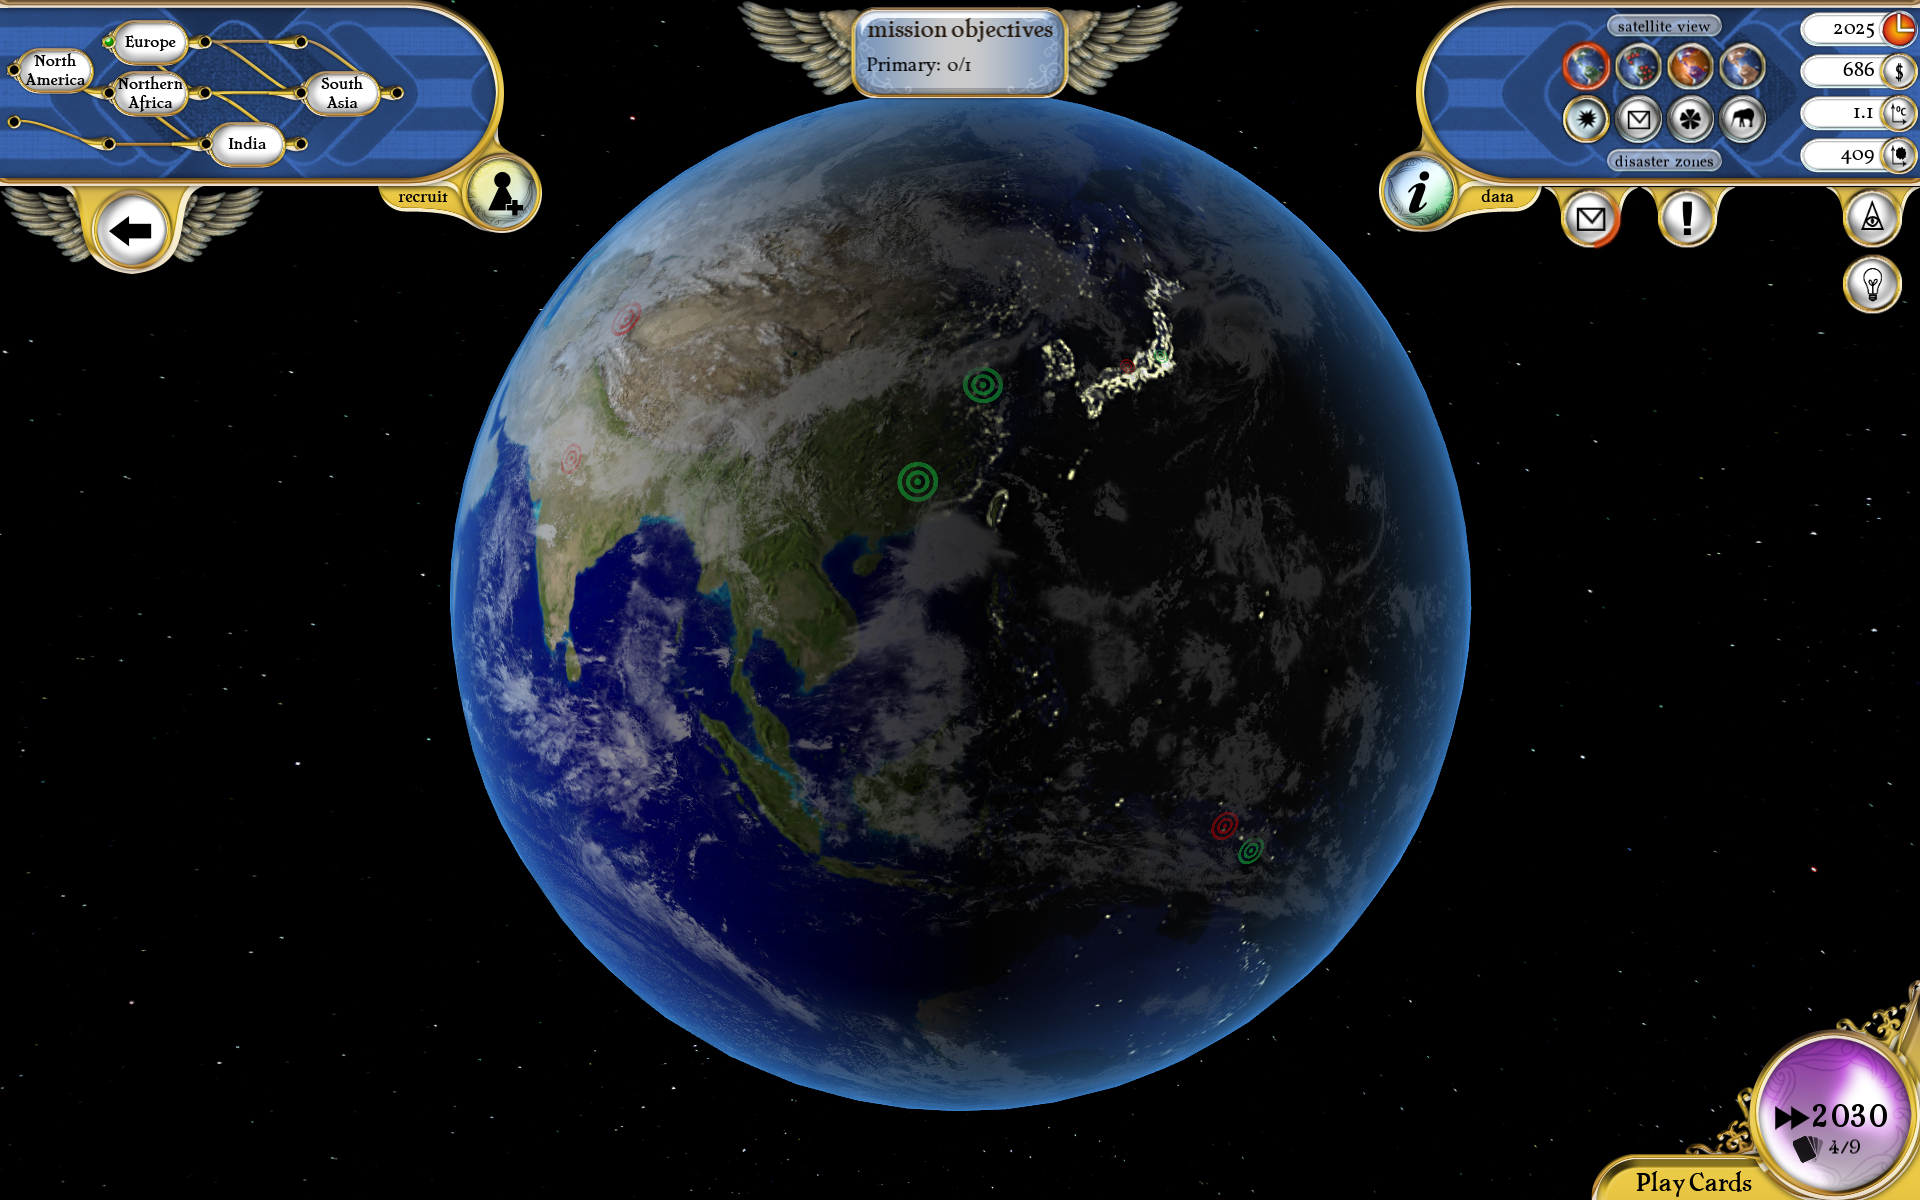 Screenshot of a game screen viewing Earth from space